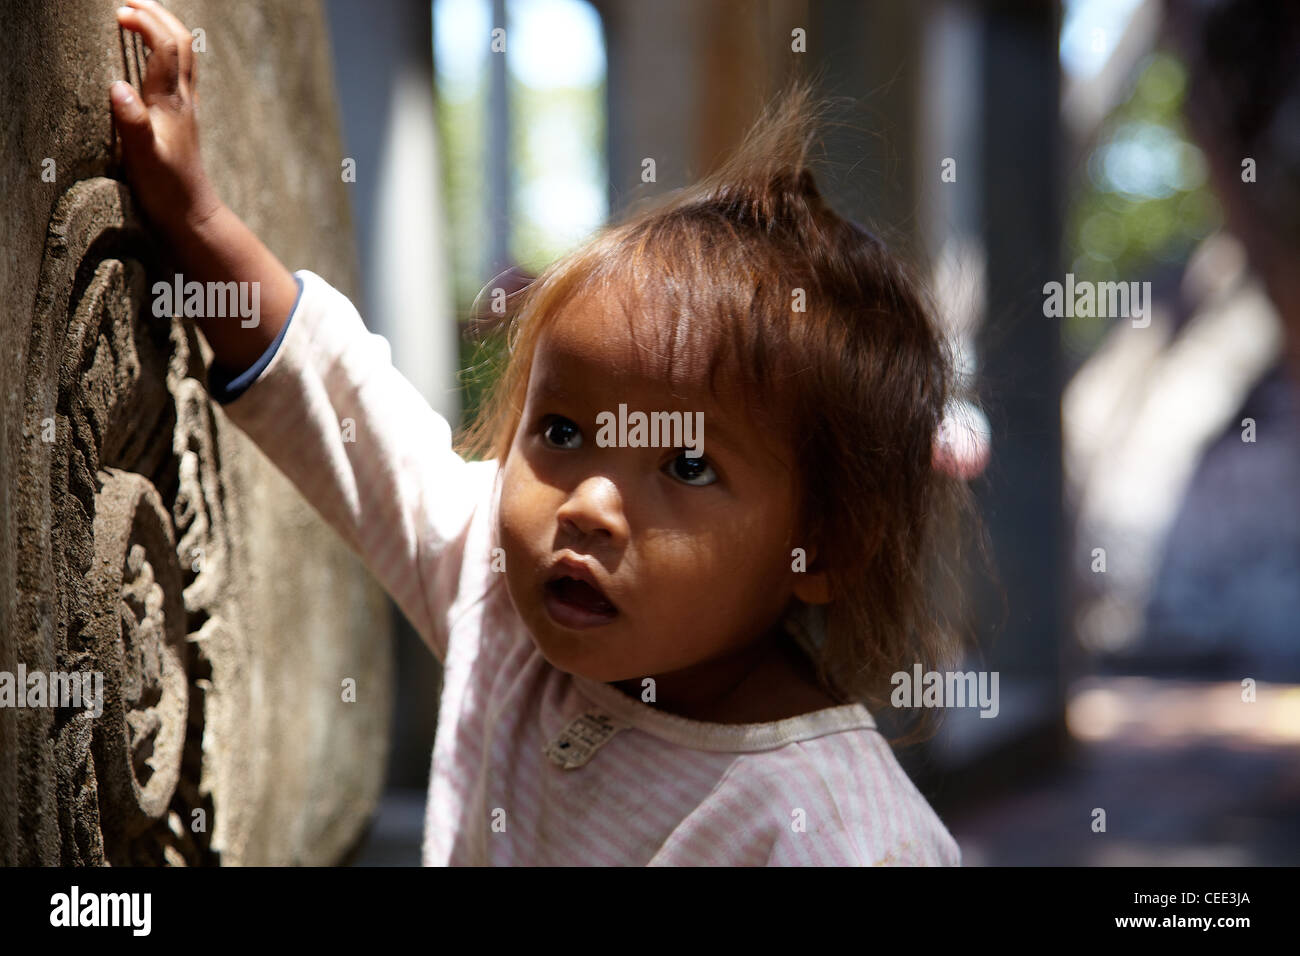 Cambodian little girl small child Stock Photo